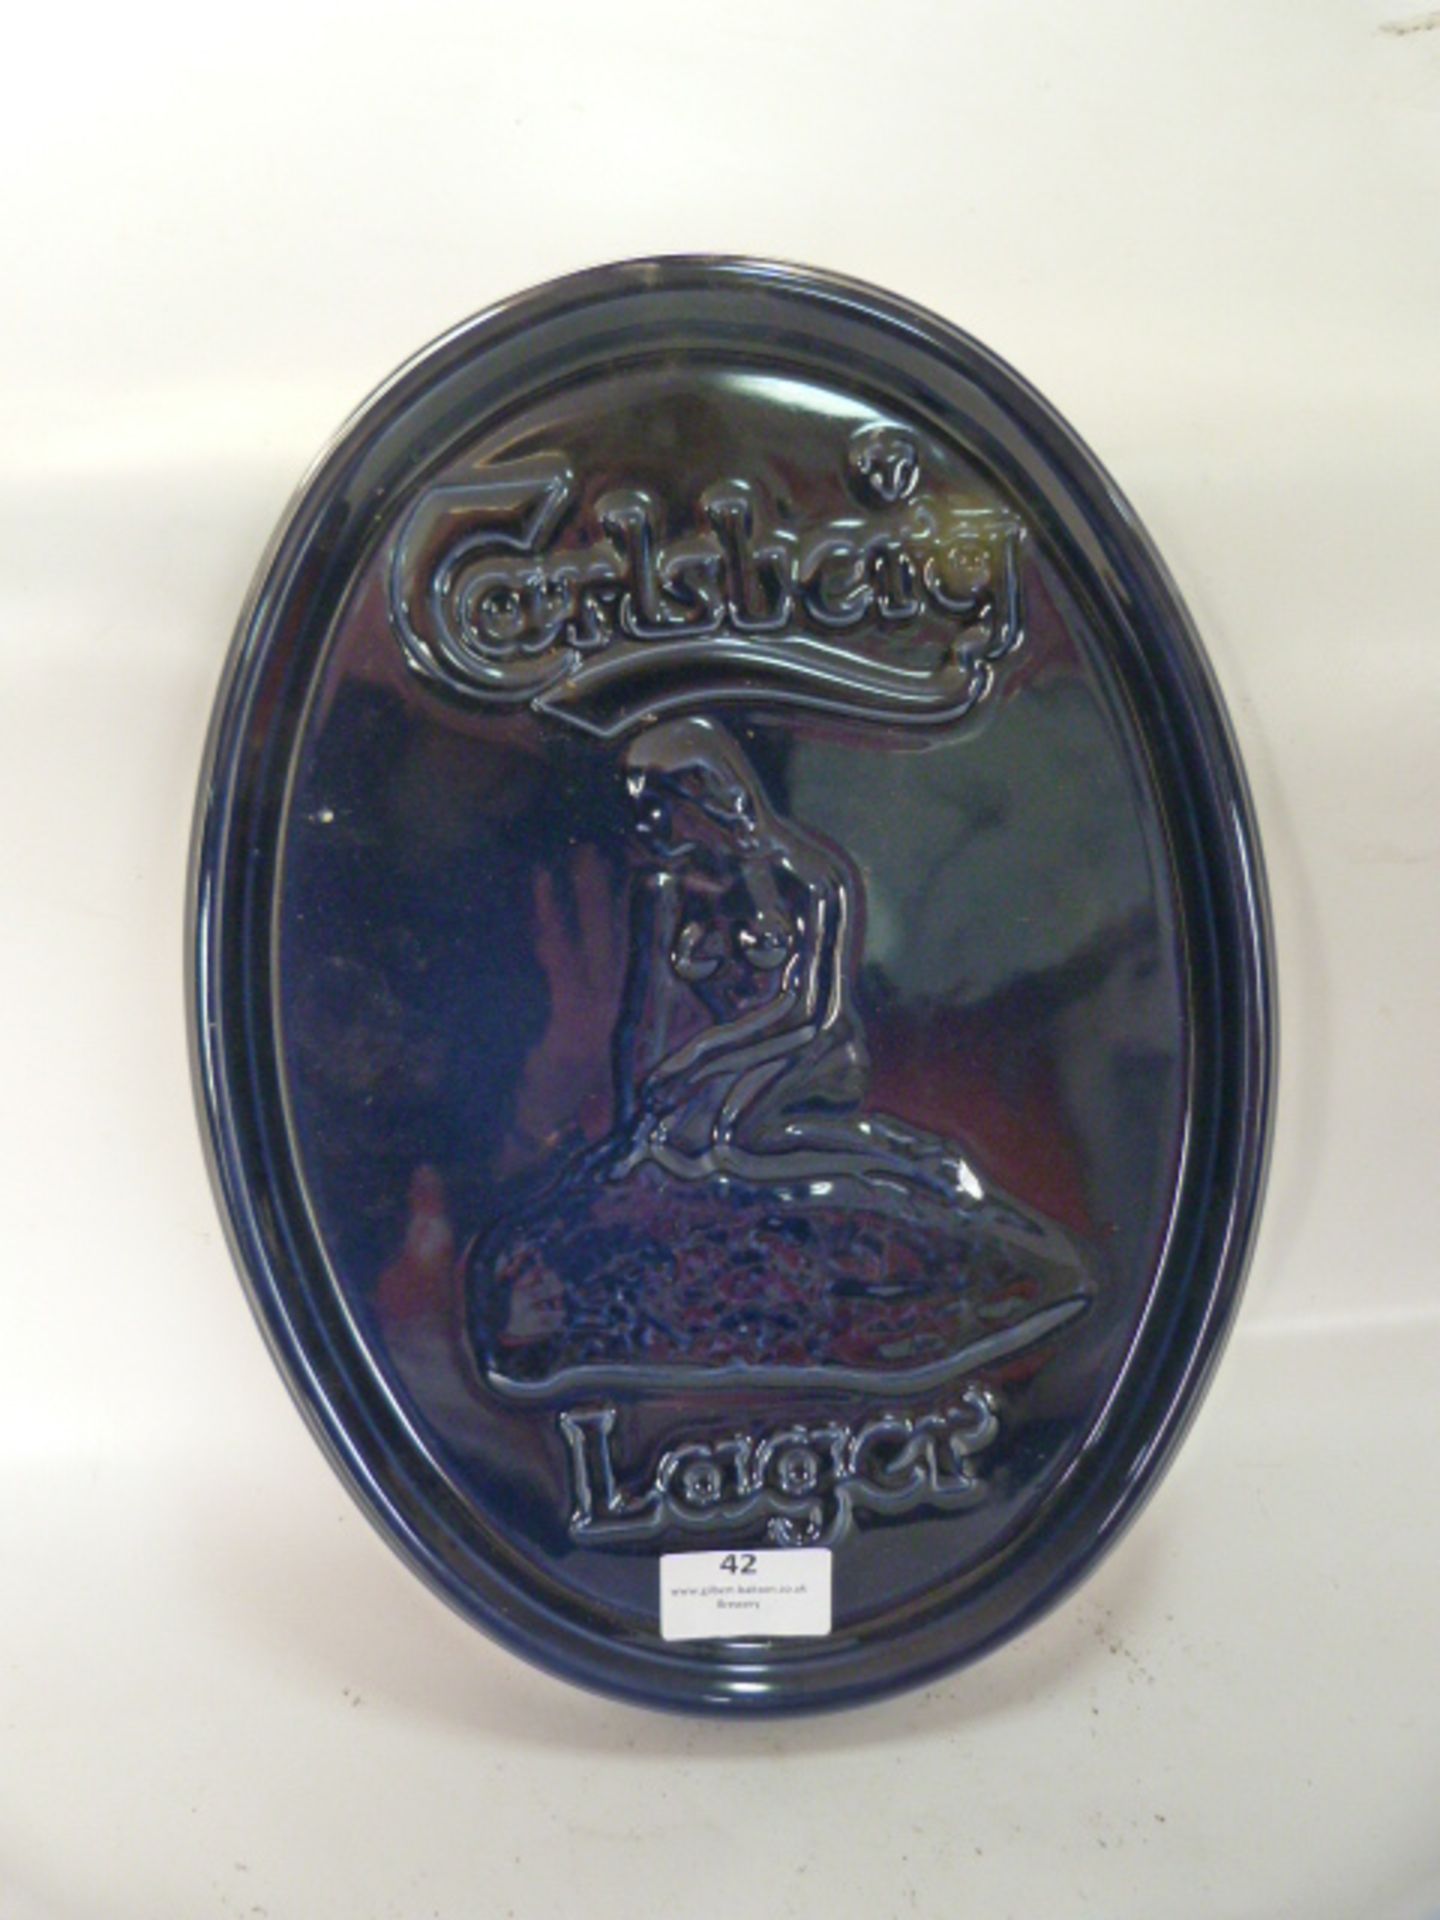 Pottery Wall Plaque "Carlsberg Lager"